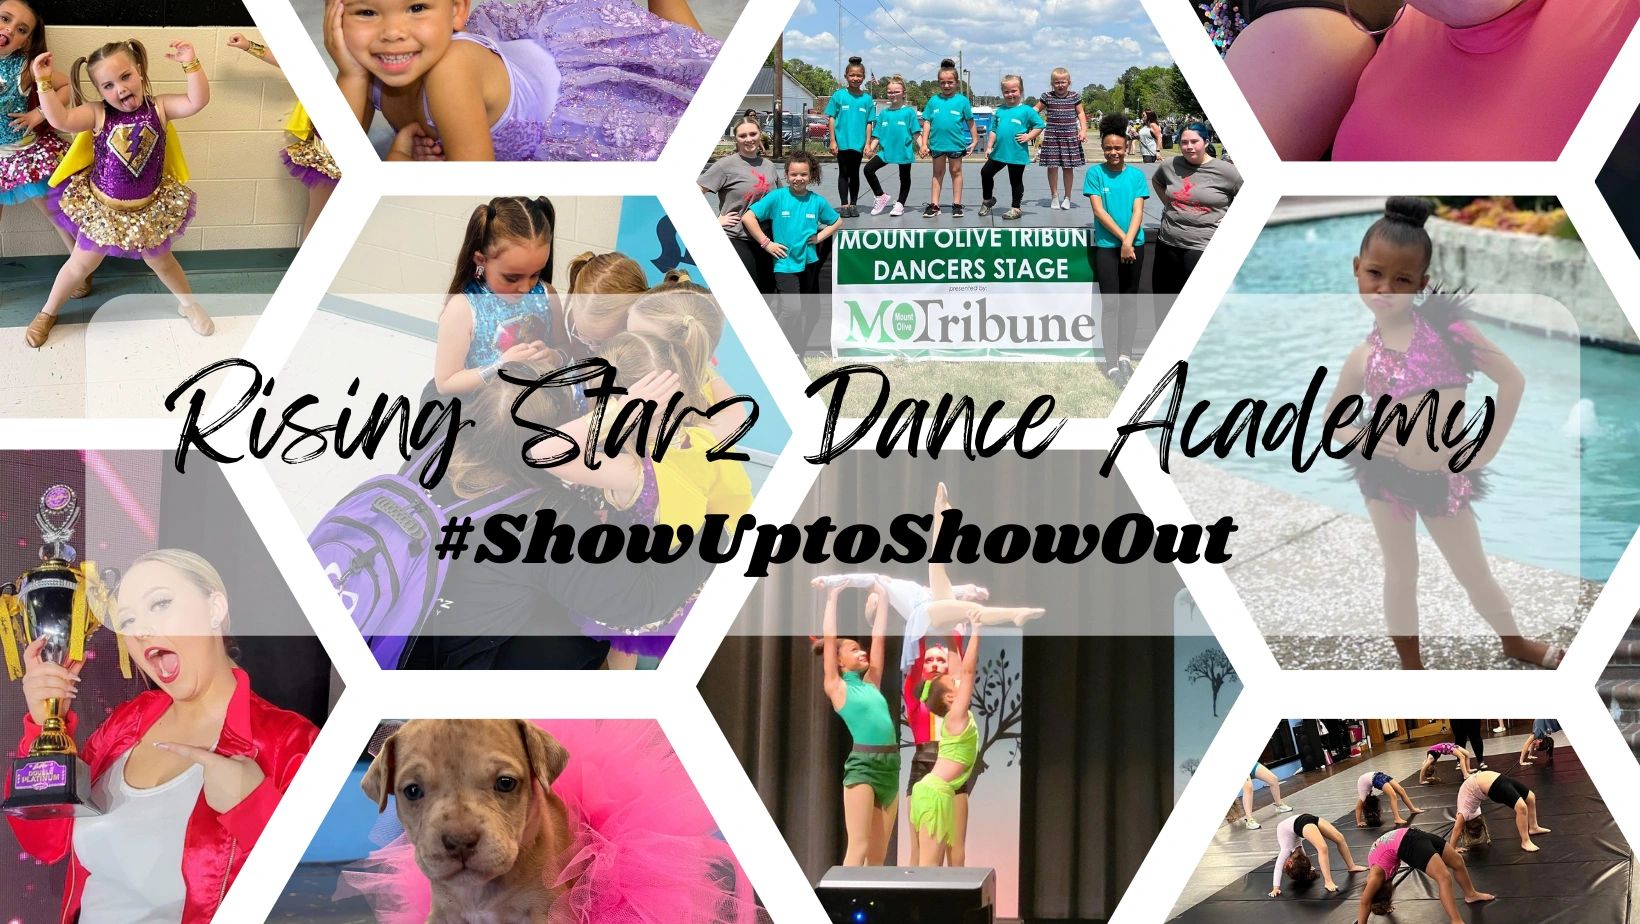 Why Choose Us, Rising Star Dance Academy